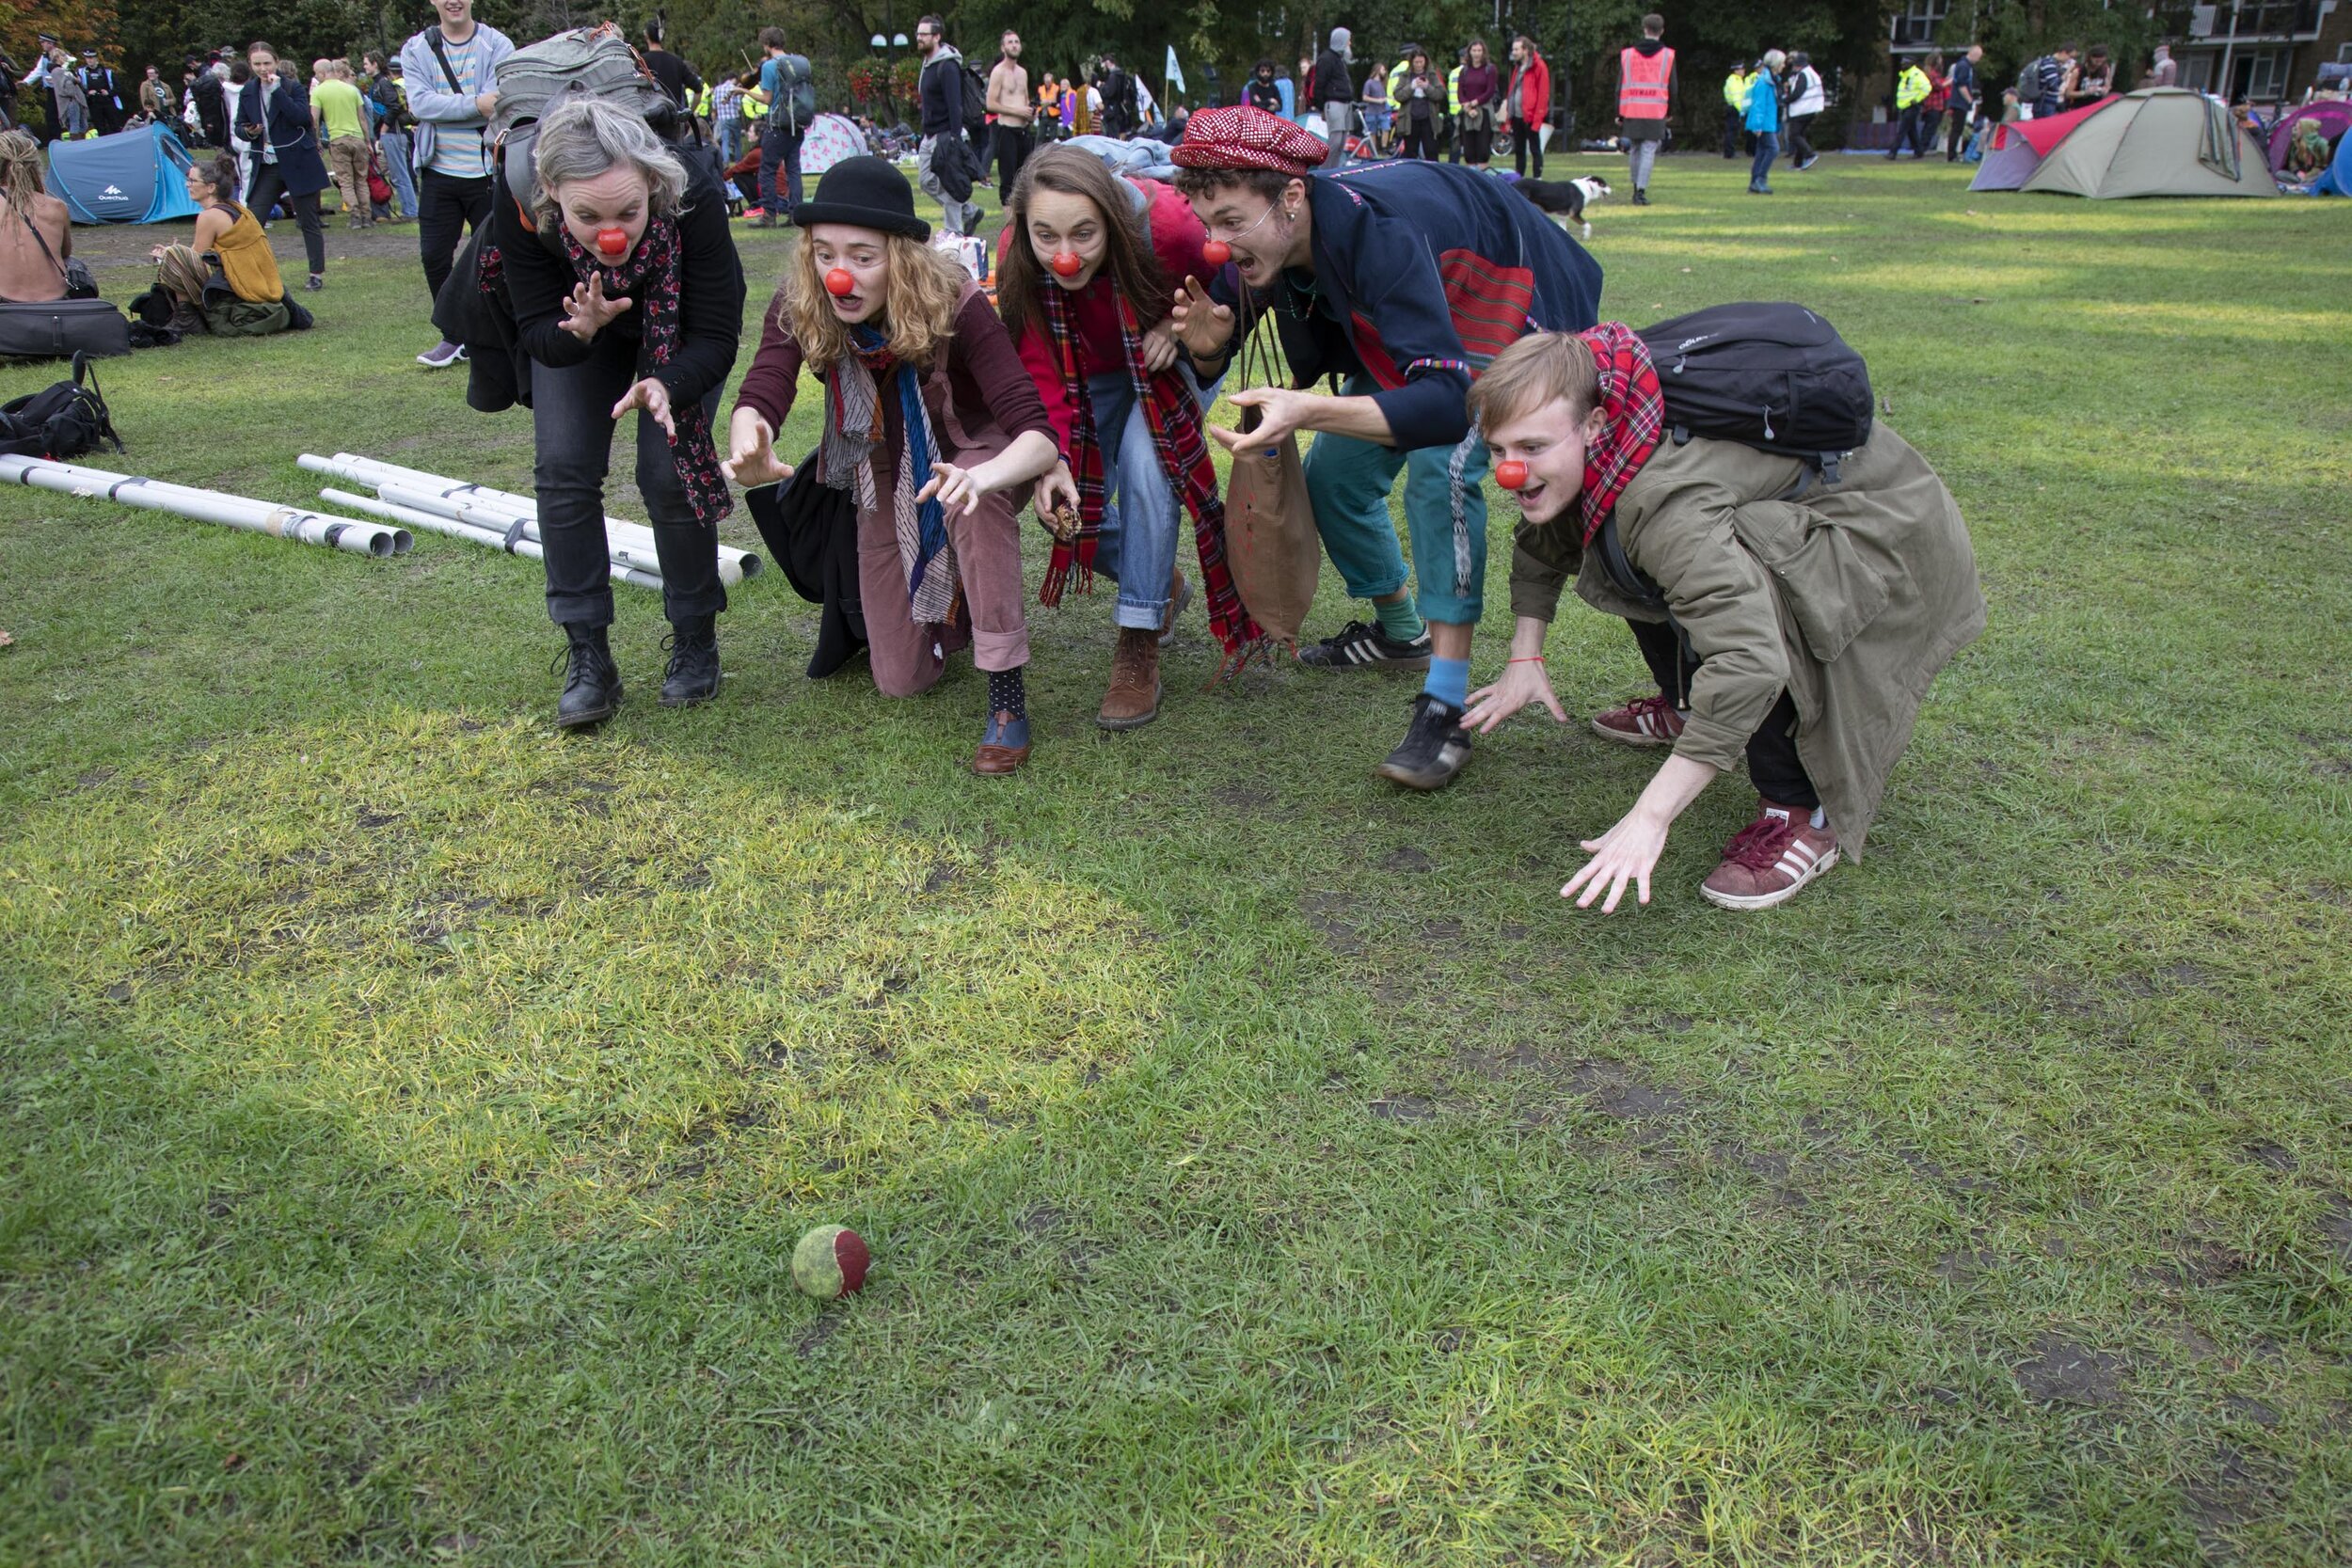  Activists wearing red noses play a game where they pretend to creep up on a tennis ball as the climate camp at Vauxhall is cleared. 